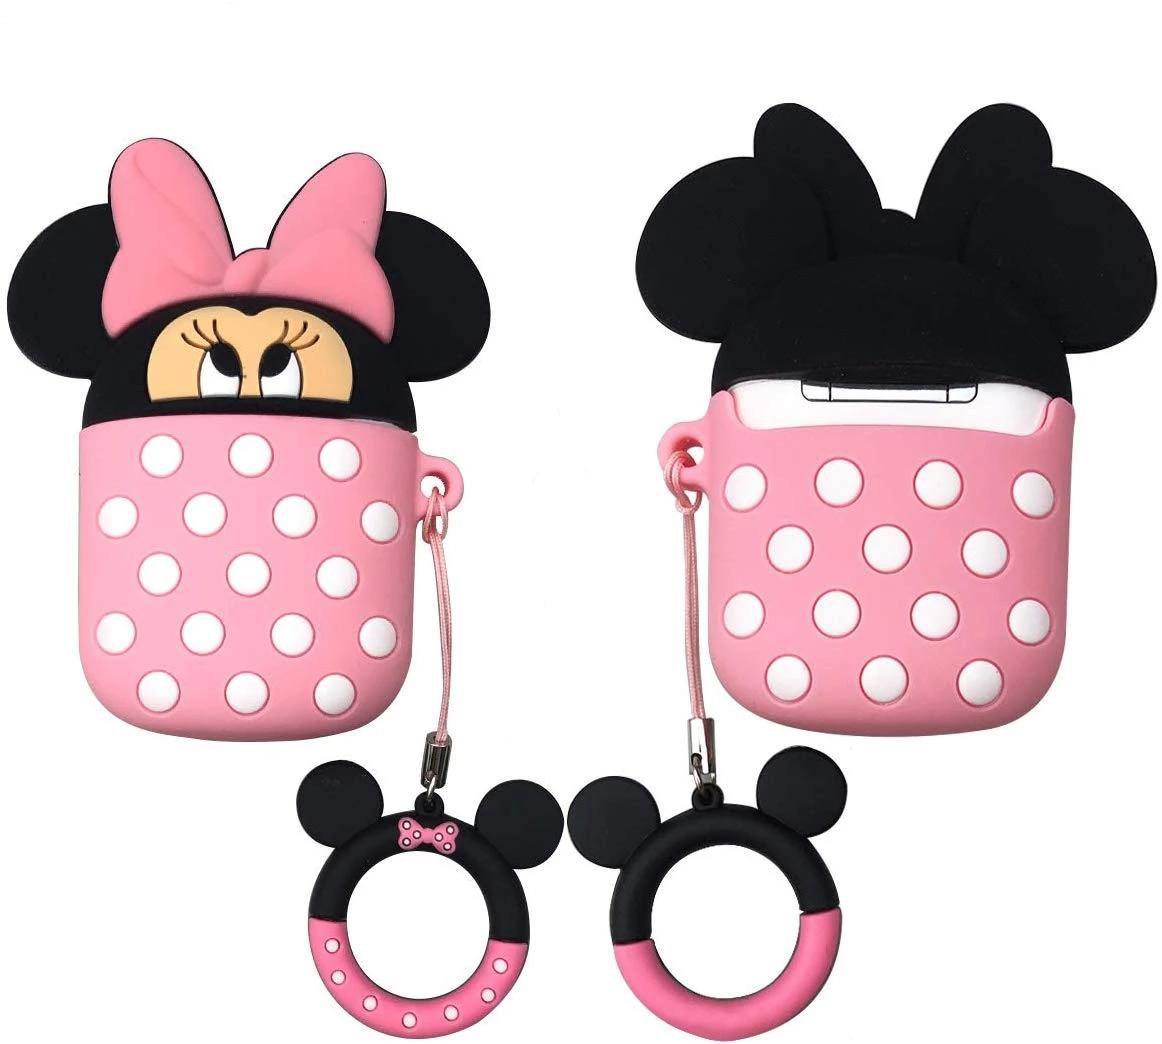 Minnie Mouse Apple Airpods Case - Lottemi